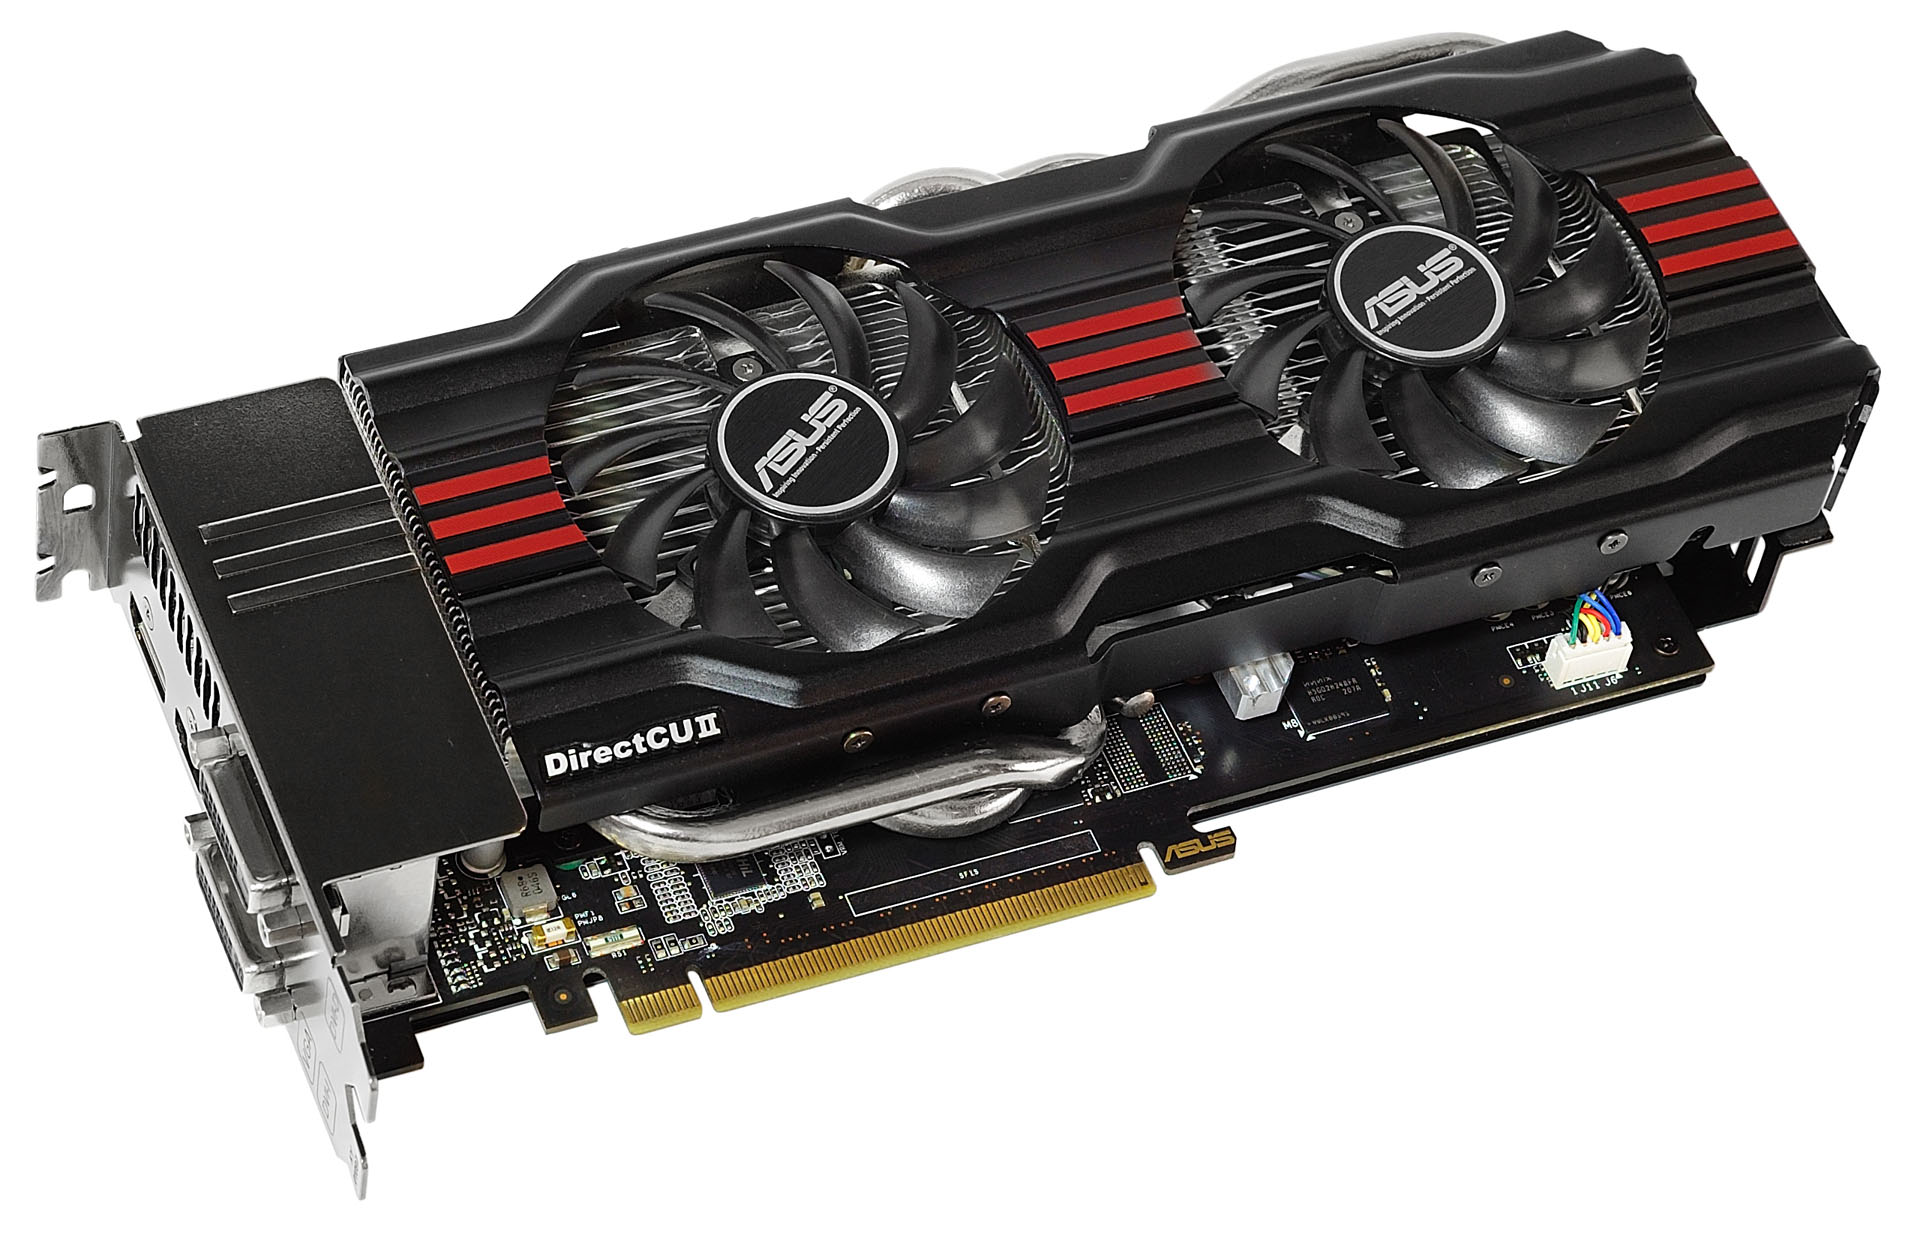 Media asset (photo, screenshot, or image in full size) related to contents posted at 3dfxzone.it | Image Name: news18395ASUS-GeForce-GTX-680-DirectCU-II-dual-slot_1.jpg